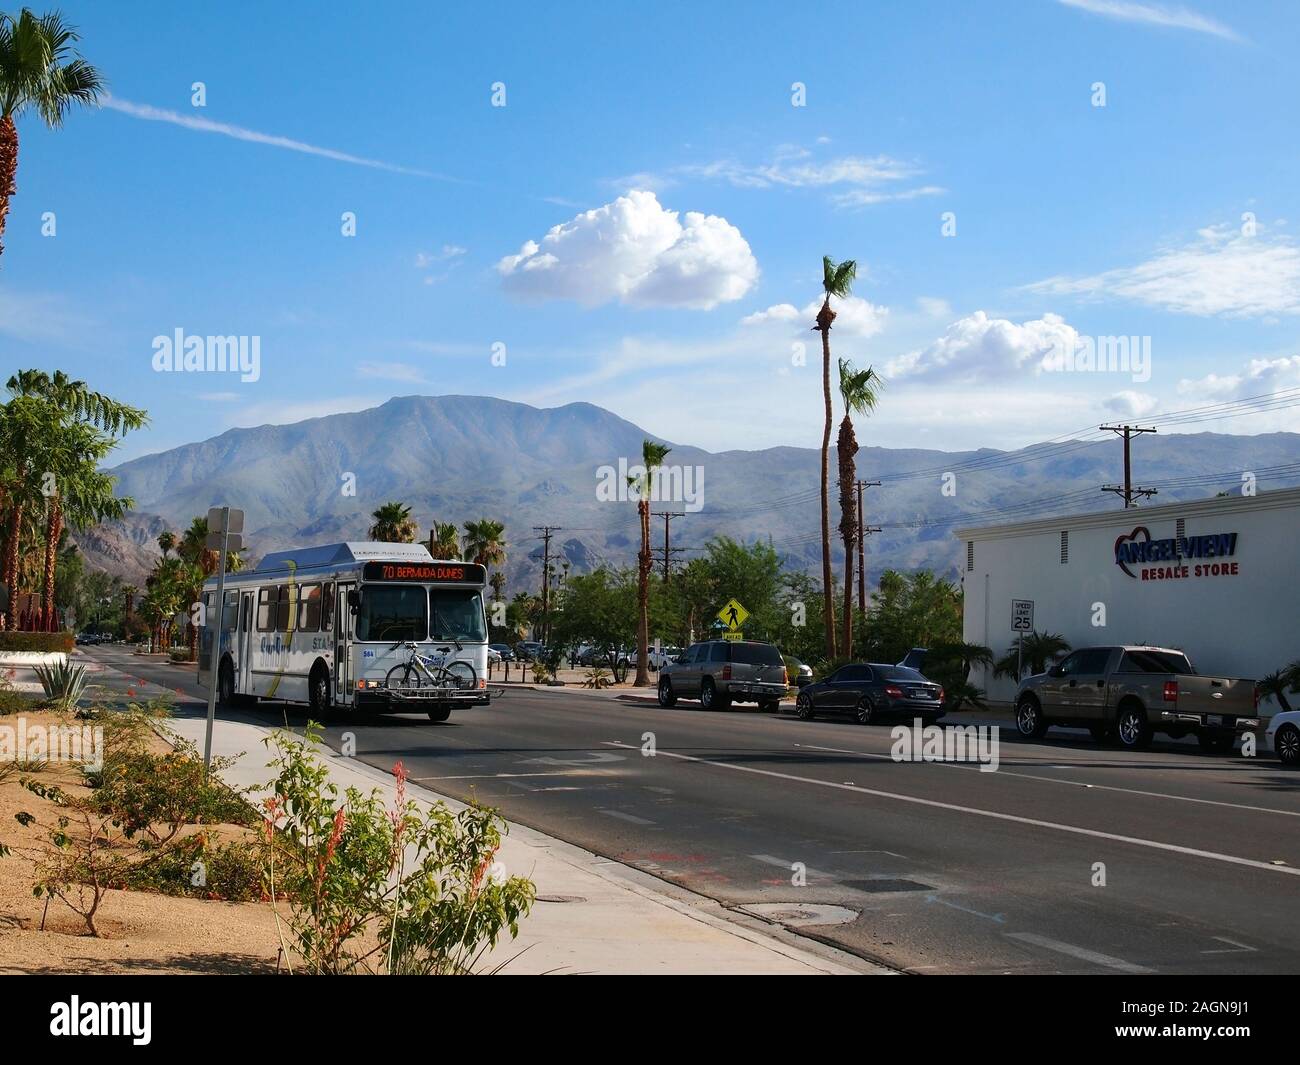 LA QUINTA, CA - JULY 17, 2018: A SunBus vehicle traveling through the La Quinta area of Palm Springs, California with a passenger bicycle riding in th Stock Photo